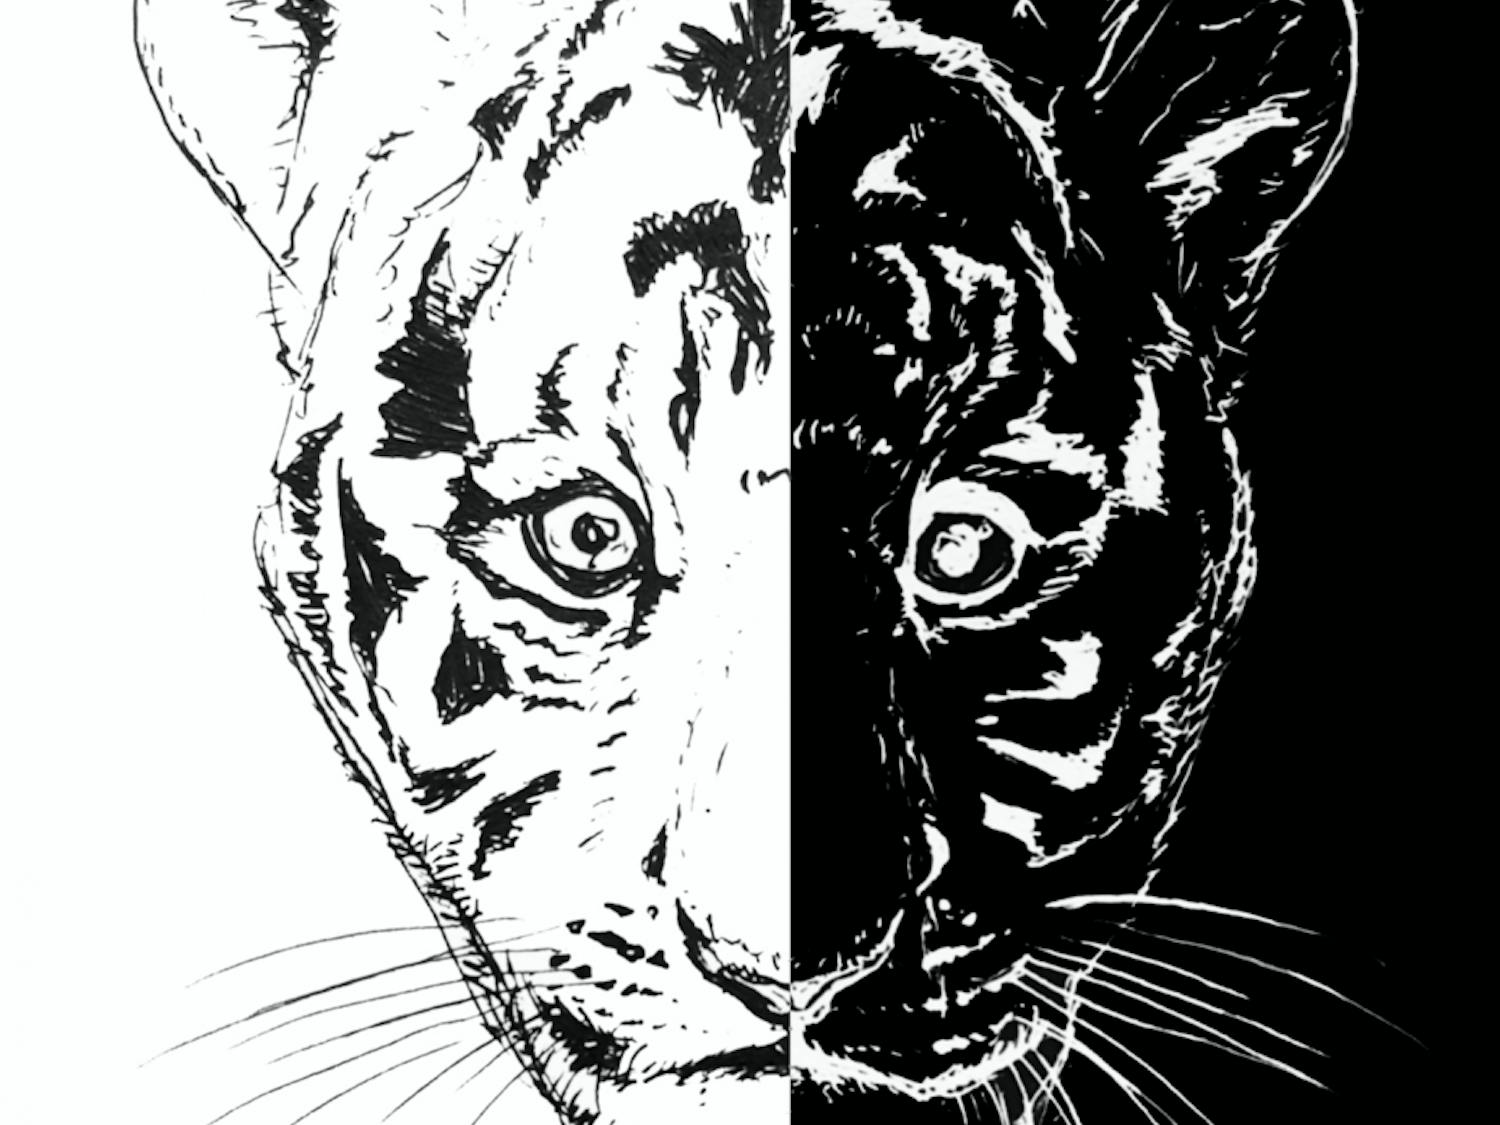 Black and White Tiger